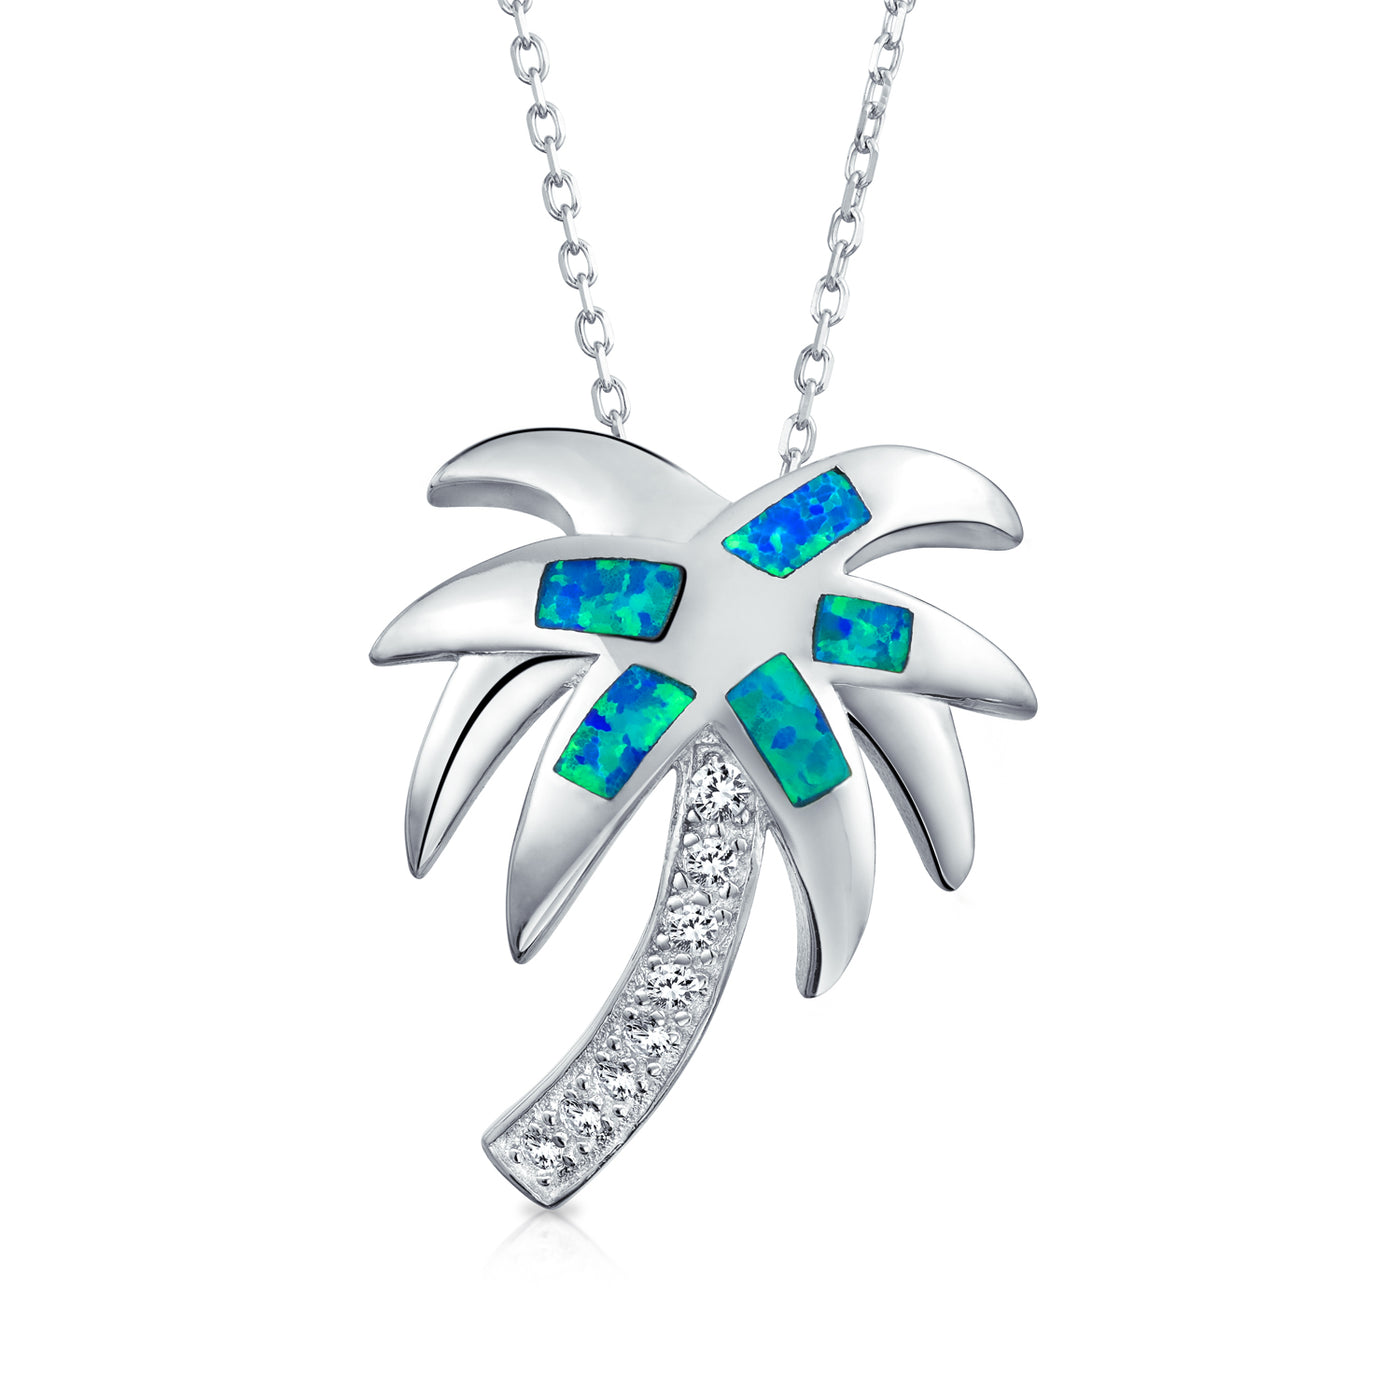 Palm Tree Pendant Blue Created Opal Necklace Sterling Silver Chain